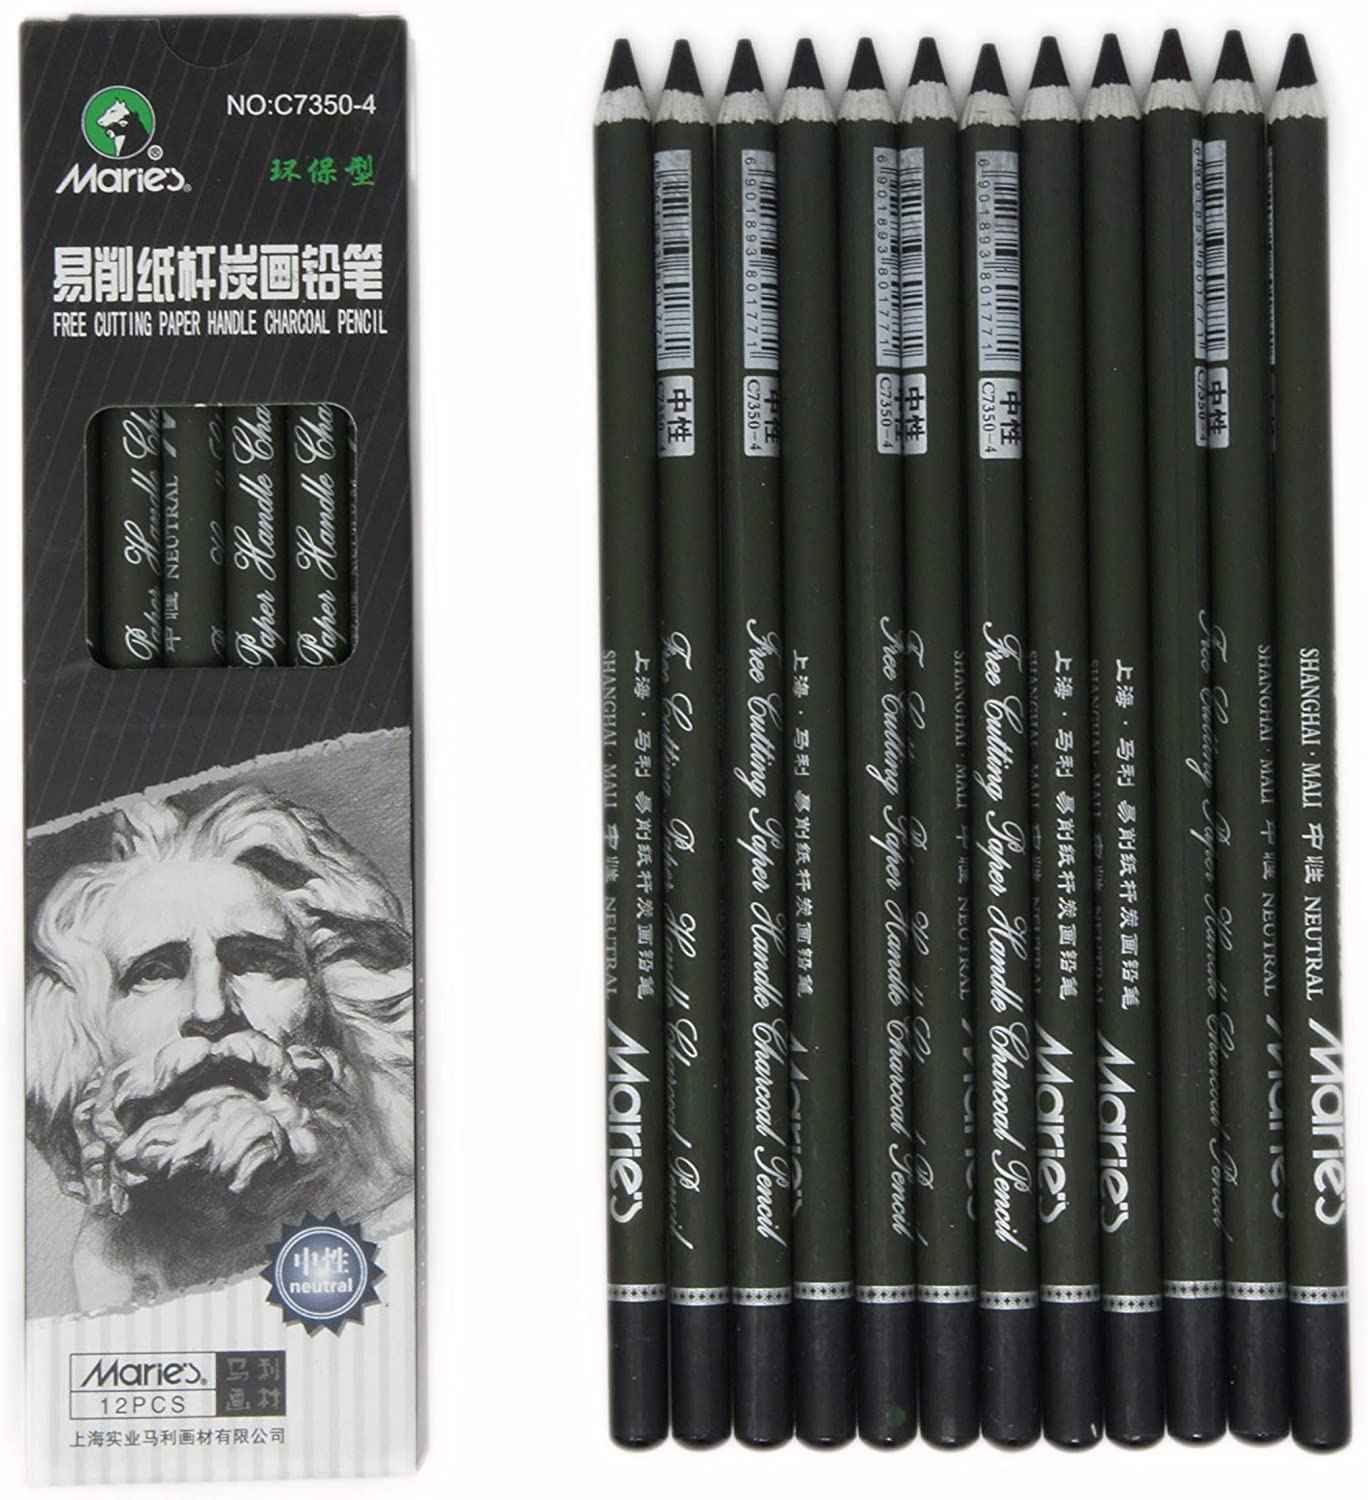 Marie's 12 Artist Soft Black Paper Handle Charcoal Pencils for Drawing Sketching - TTpen